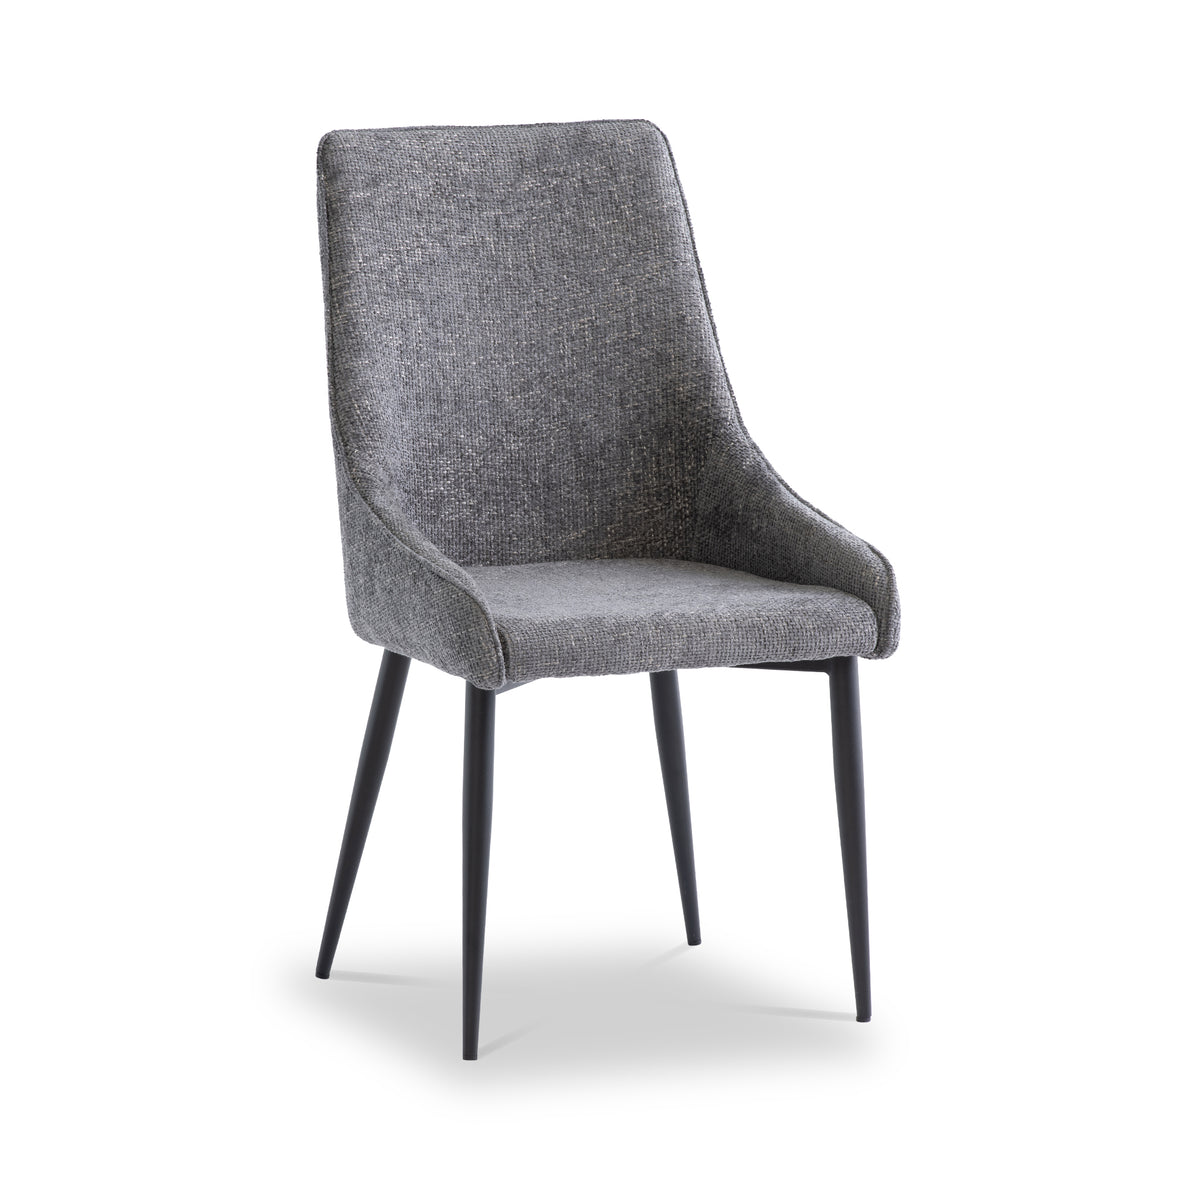 Perth Graphite Dining Chair by Roseland Furniture